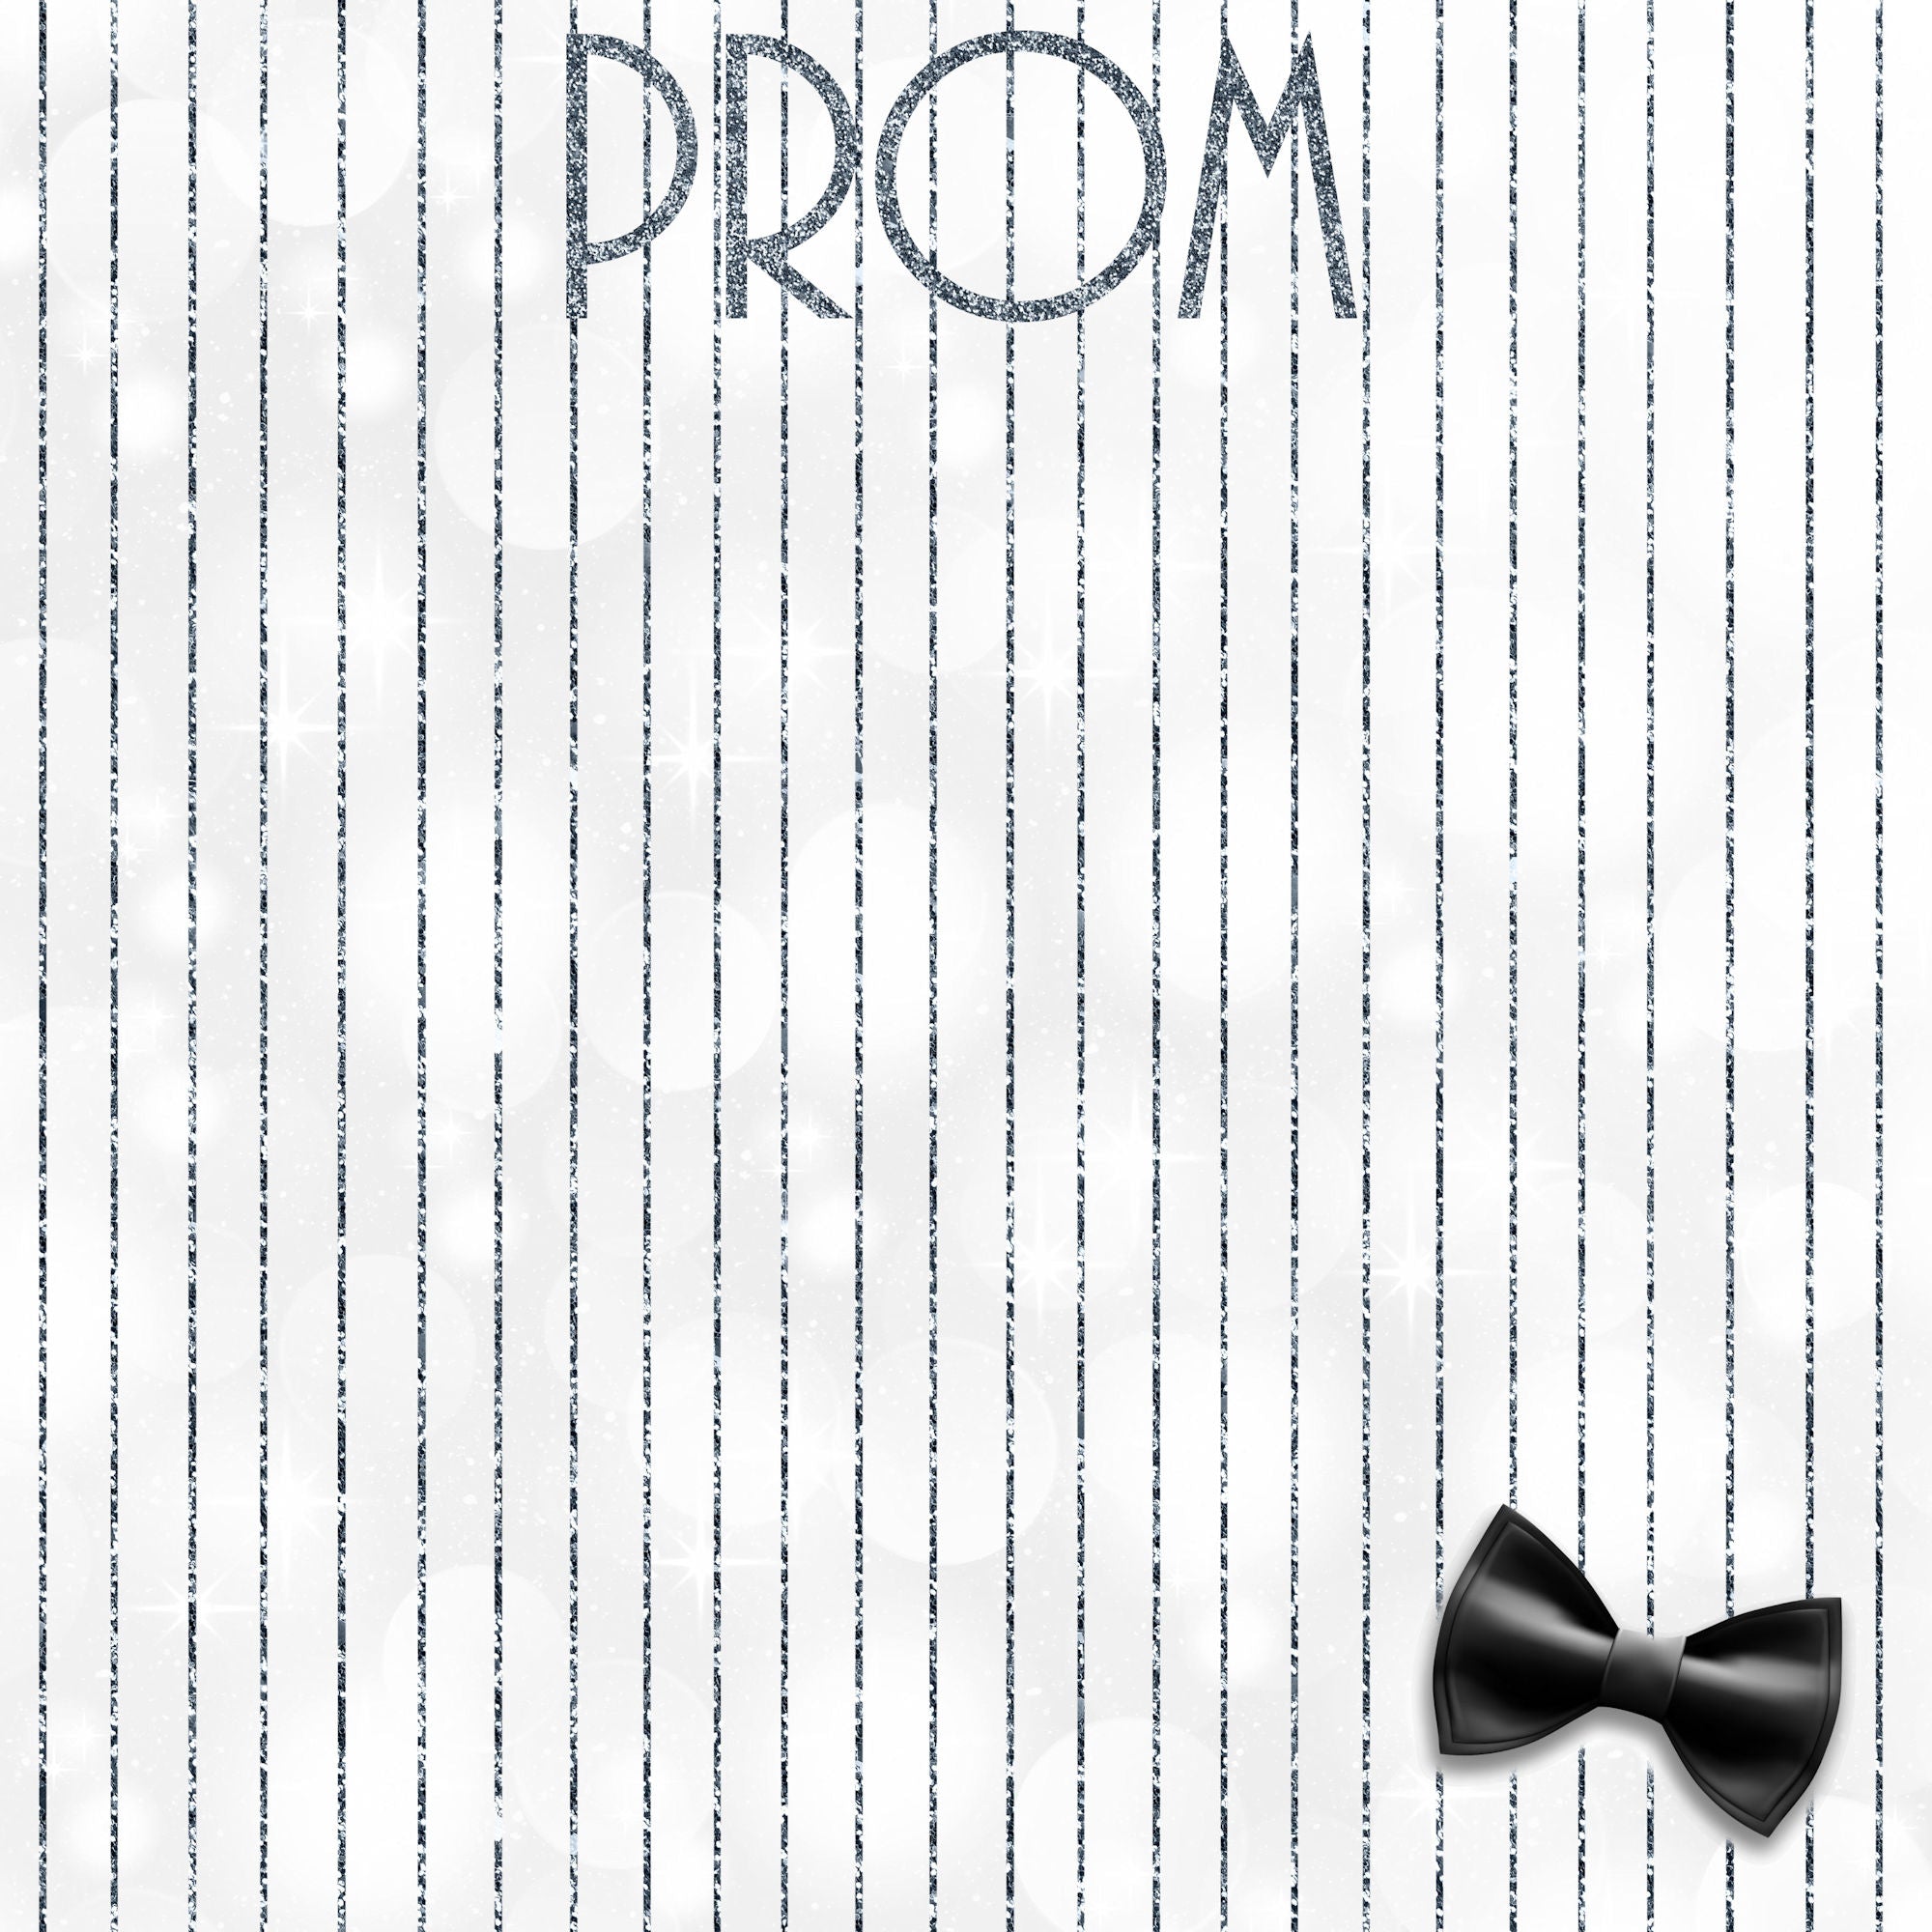 Prom Night Collection Bow Tie 12 x 12 Double-Sided Scrapbook Paper by SSC Designs